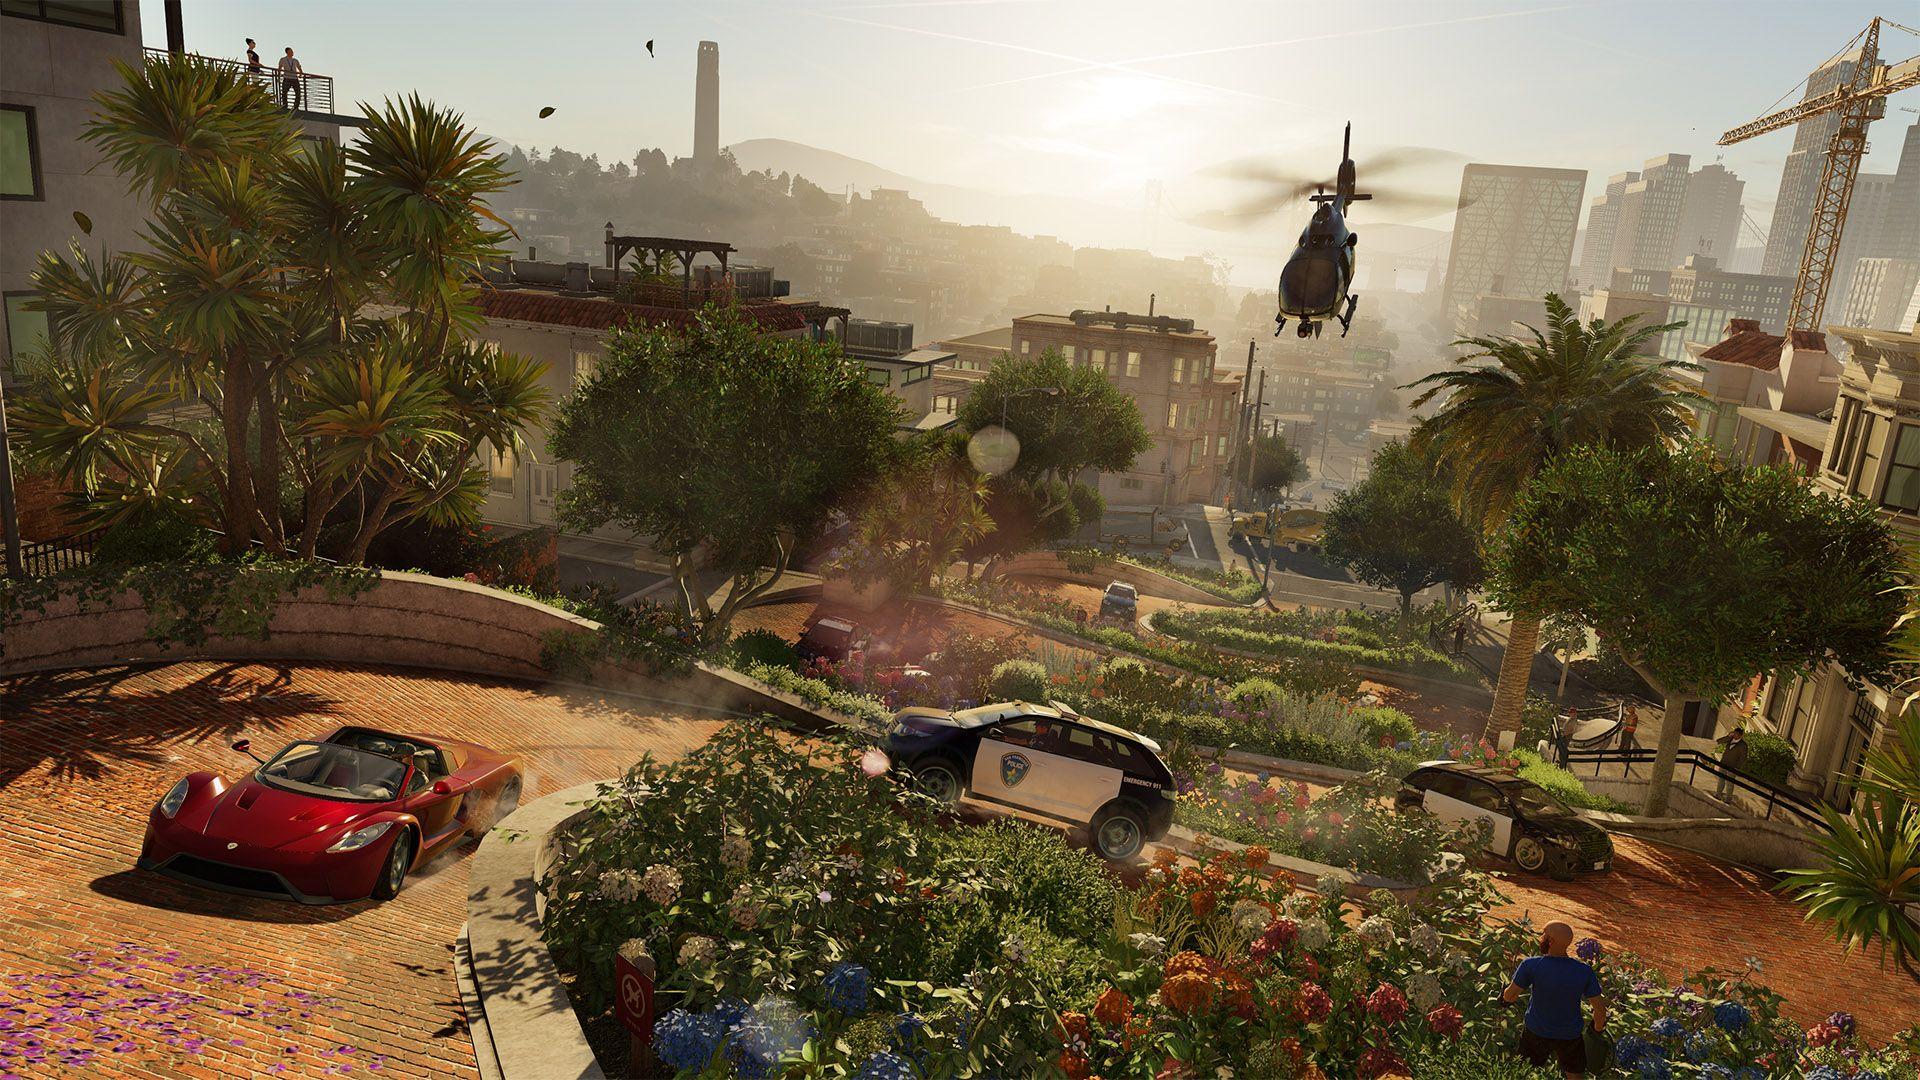 Watch Dogs 2 PS4 Pro 4K Gameplay Video Showcases First 15 Minutes